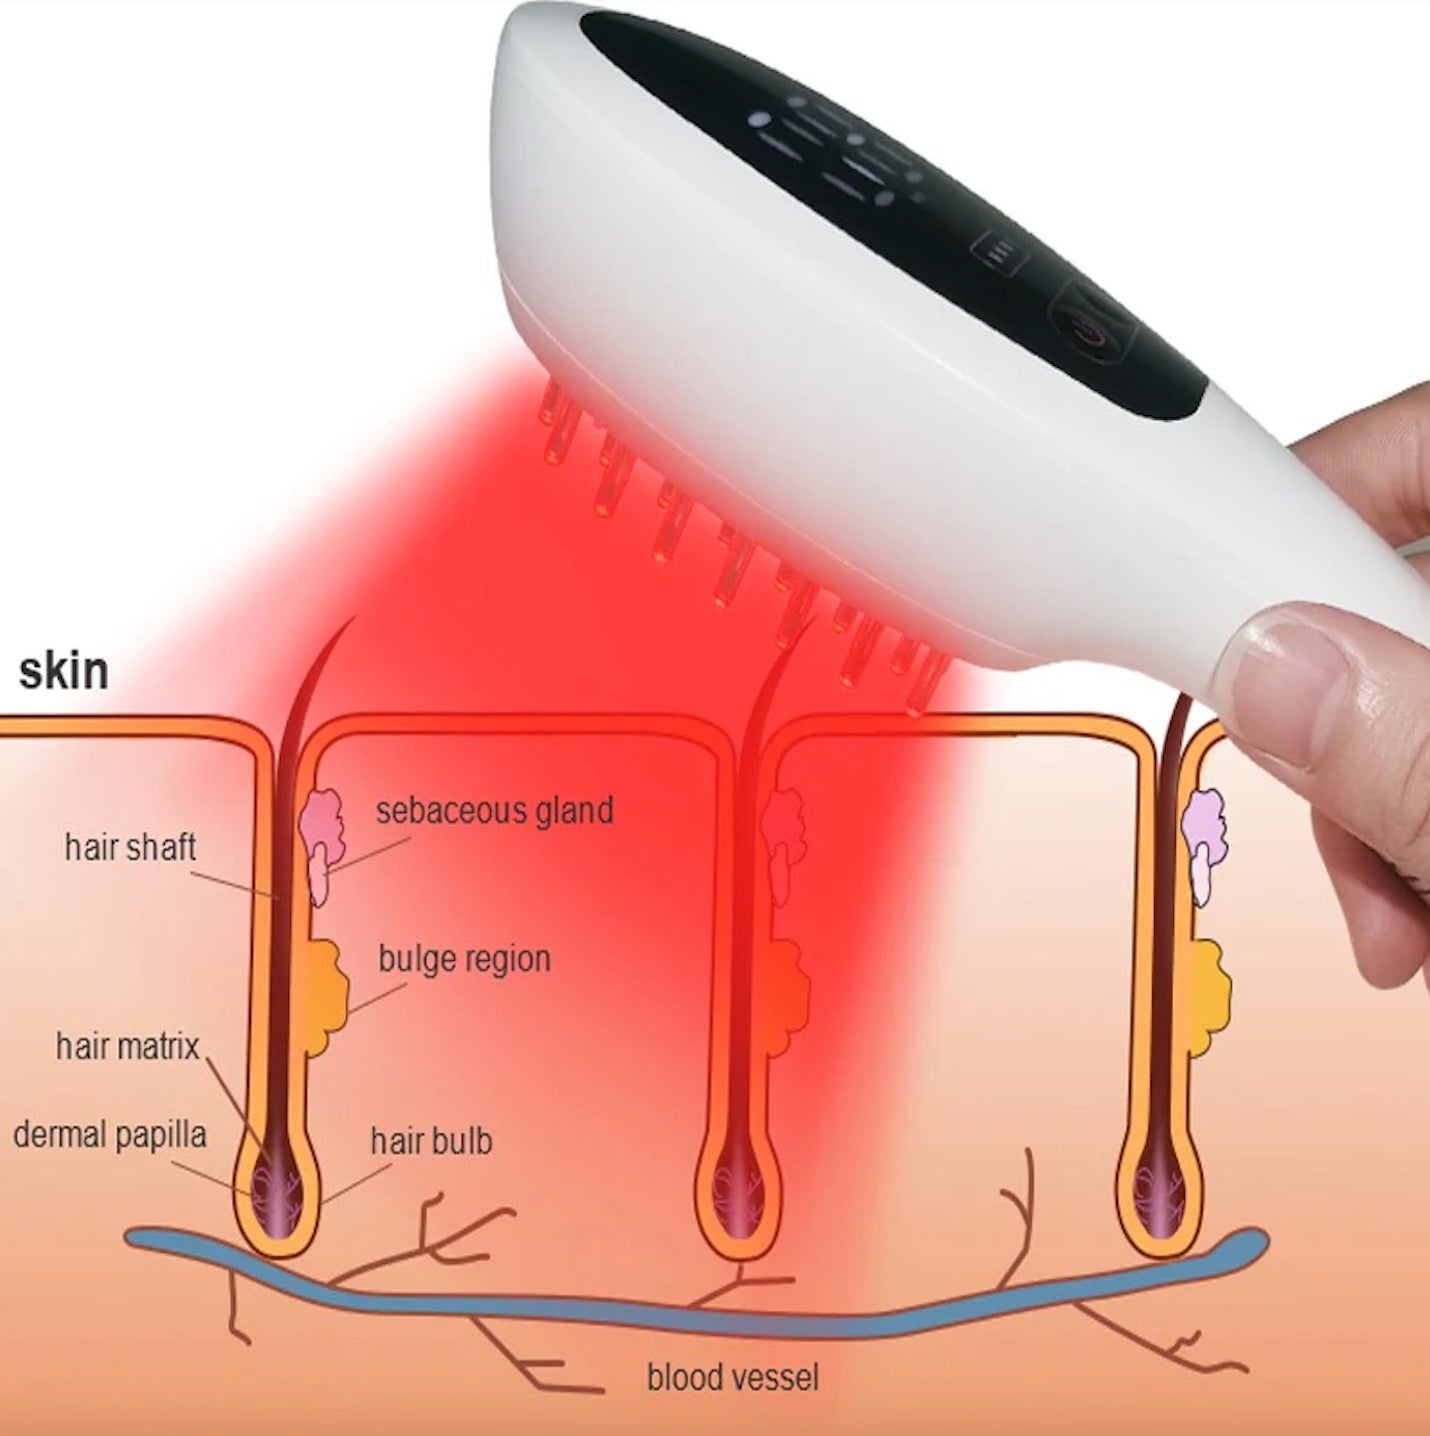 Led energy comb for hair loss